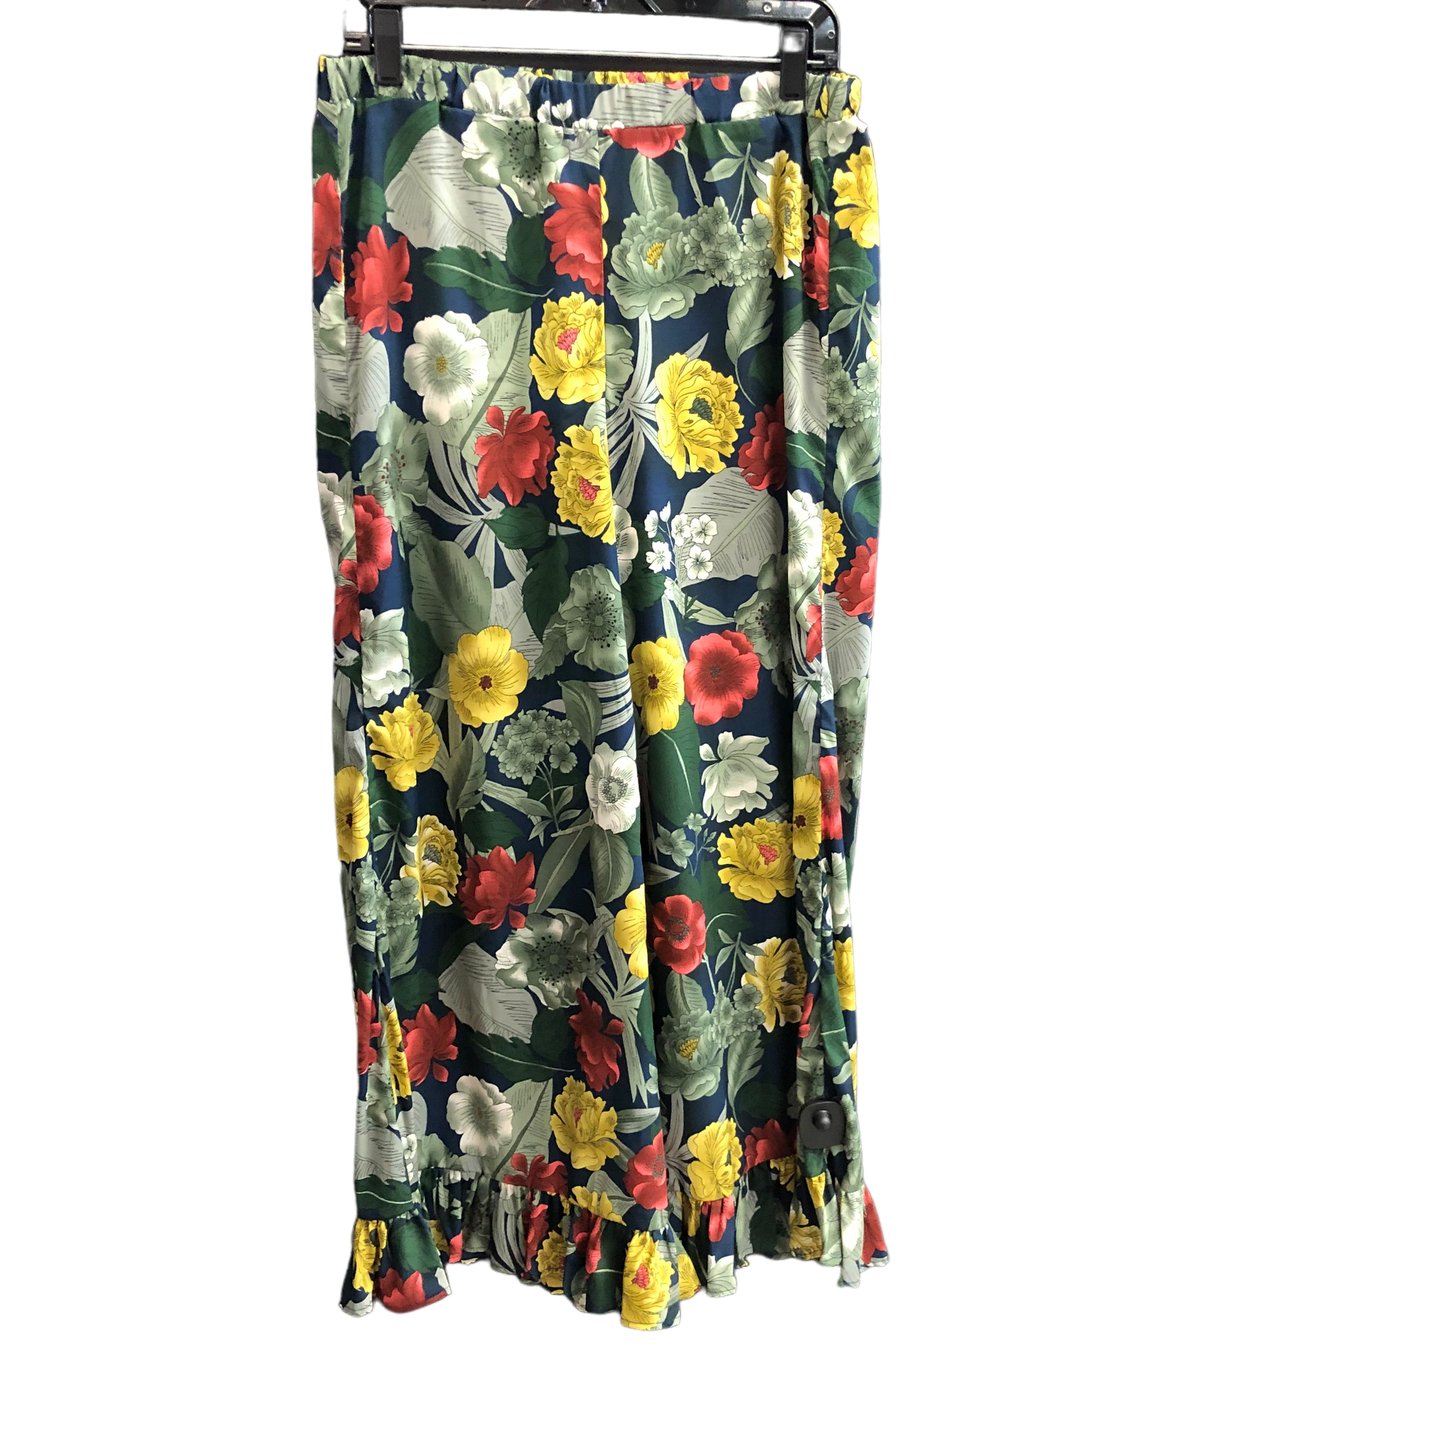 Floral Print Pants Dress Chelsea And Theodore, Size M